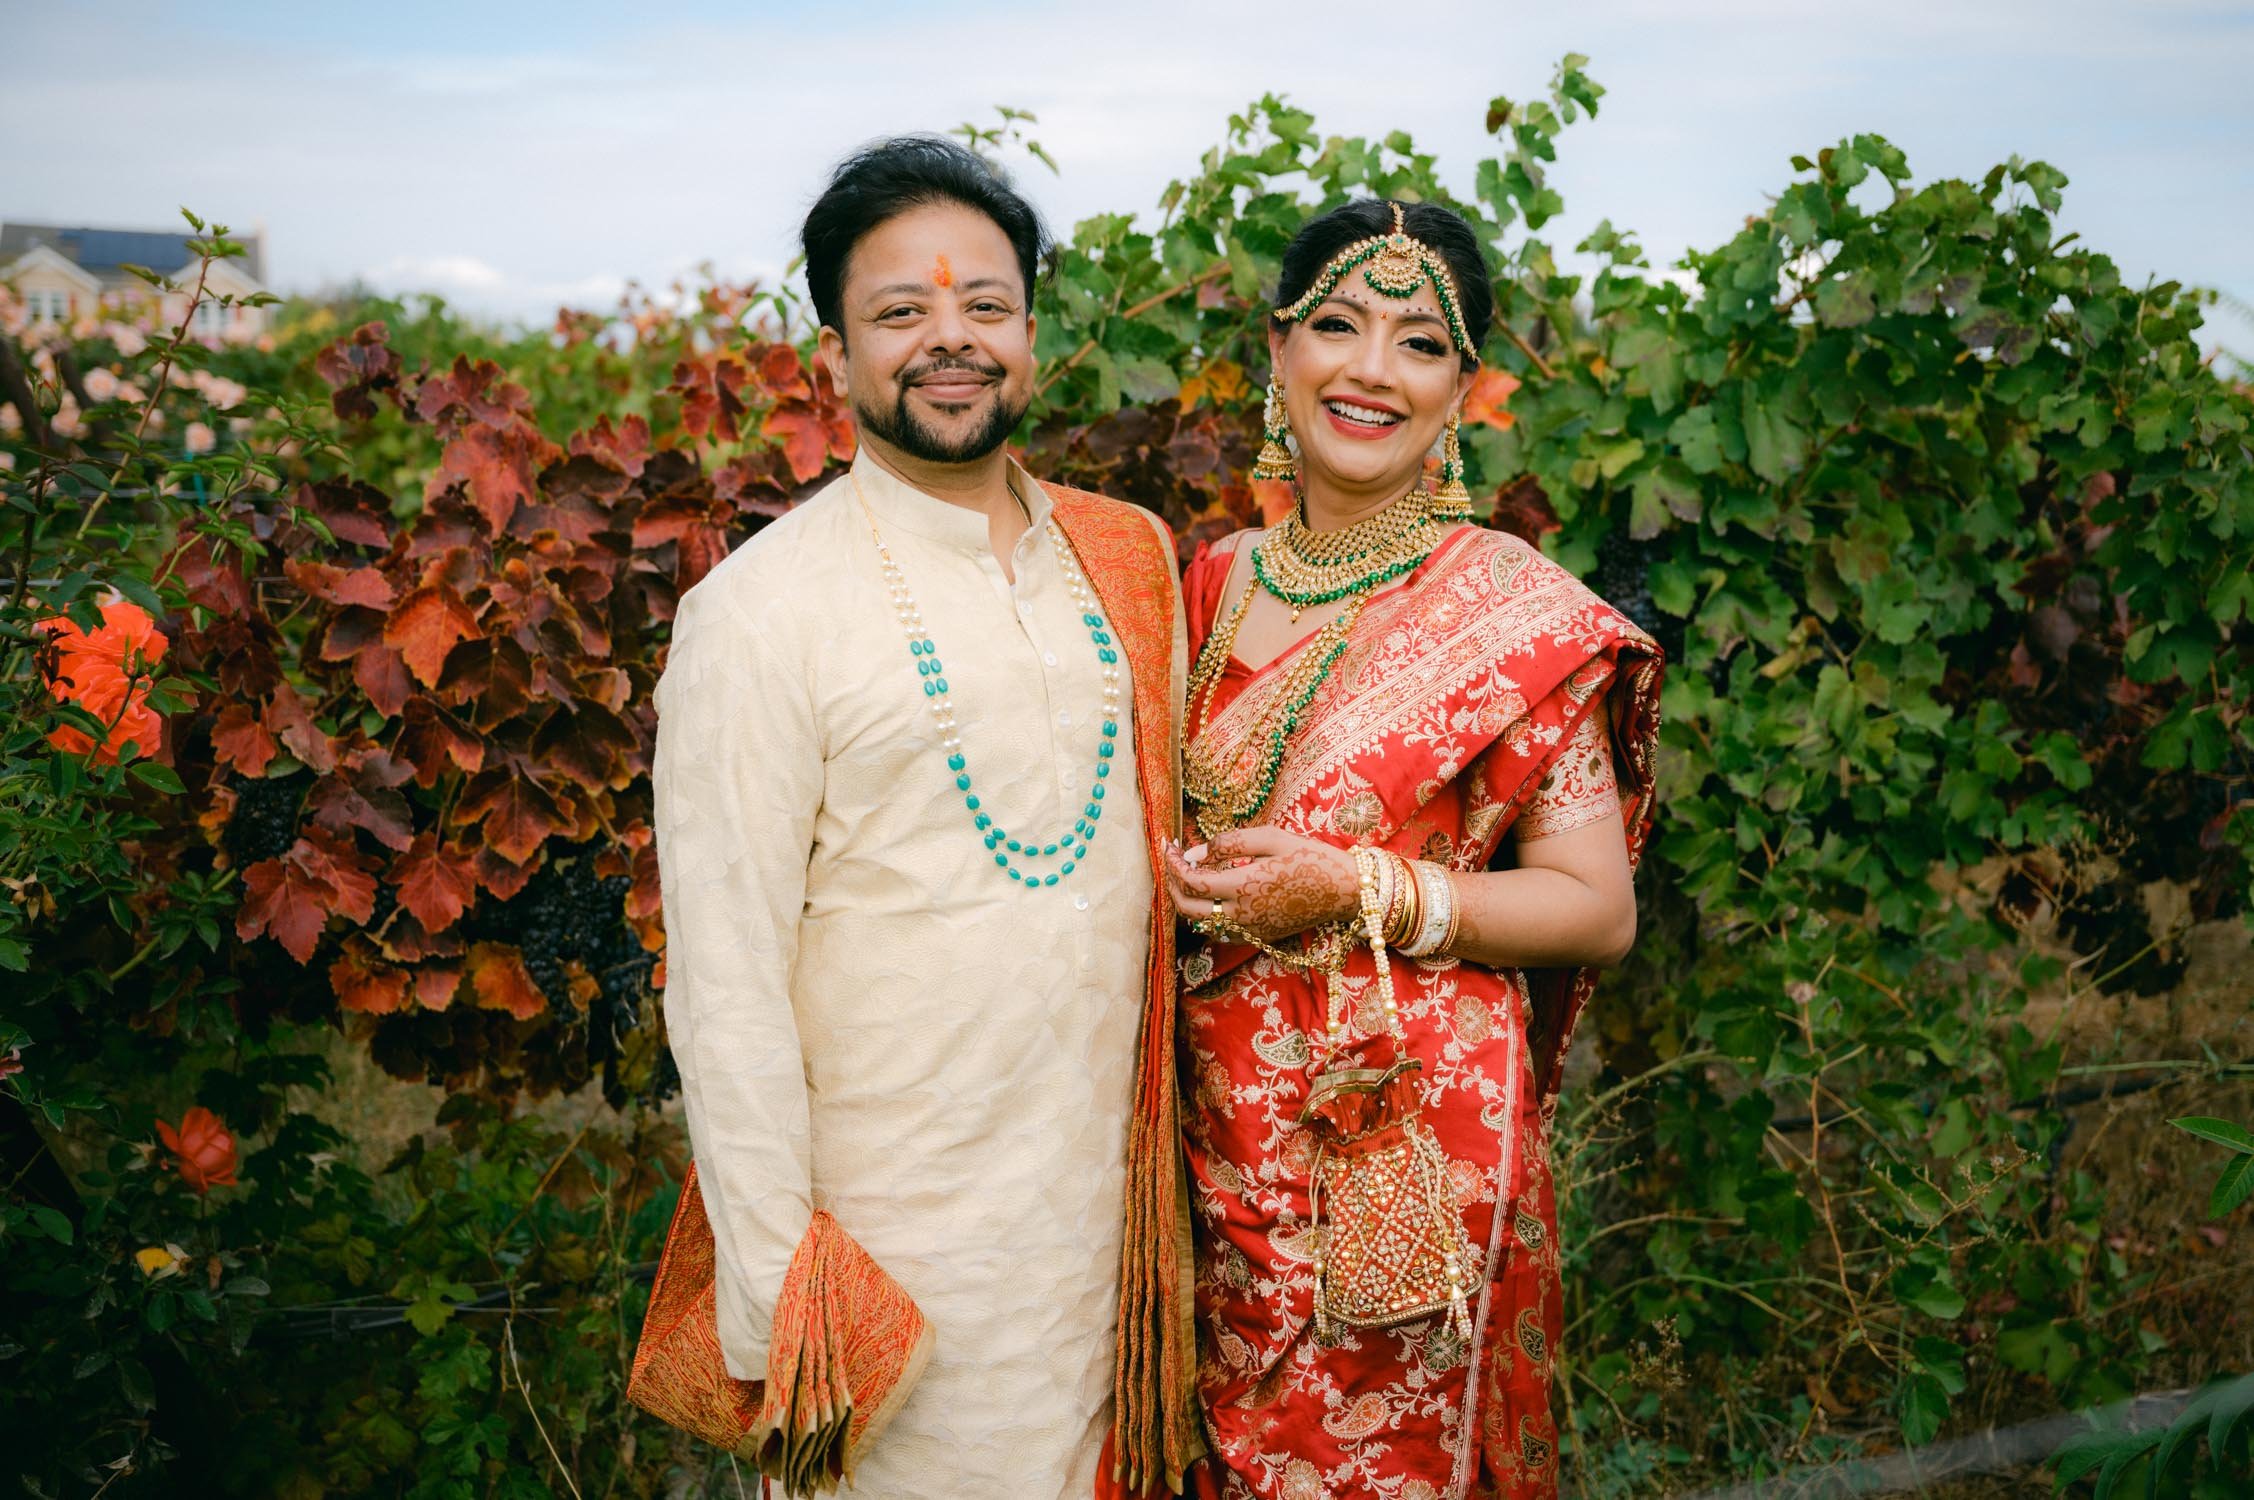 Hindu wedding ceremony at american canyon, photo of couple in the vineyard during overcast weather 